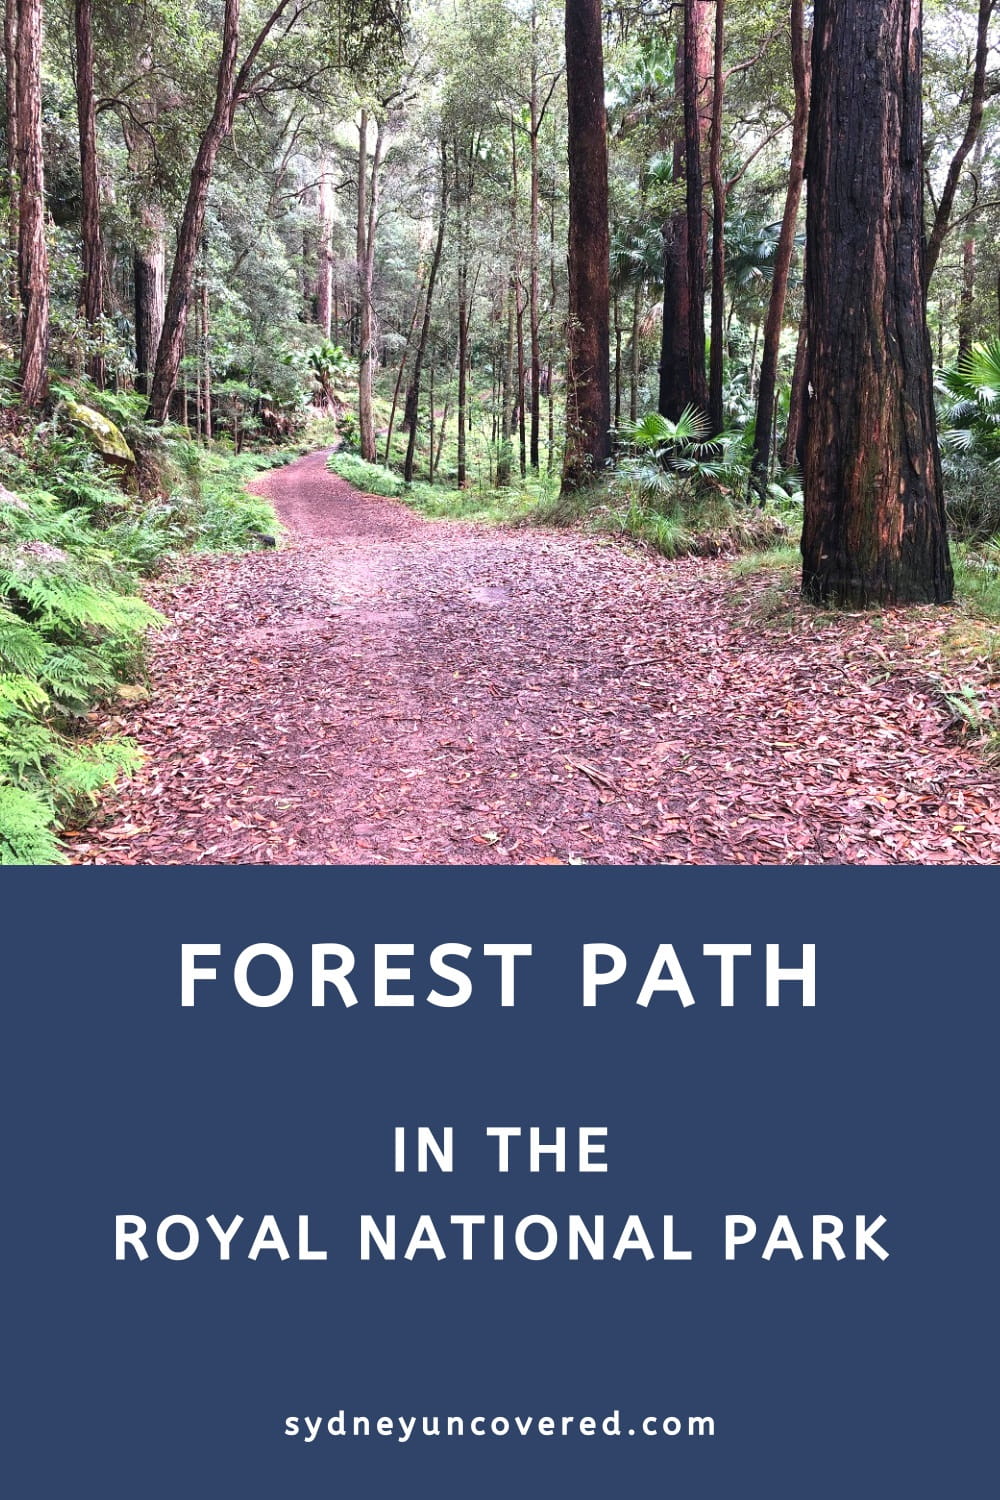 Forest Path walking track in Royal National Park